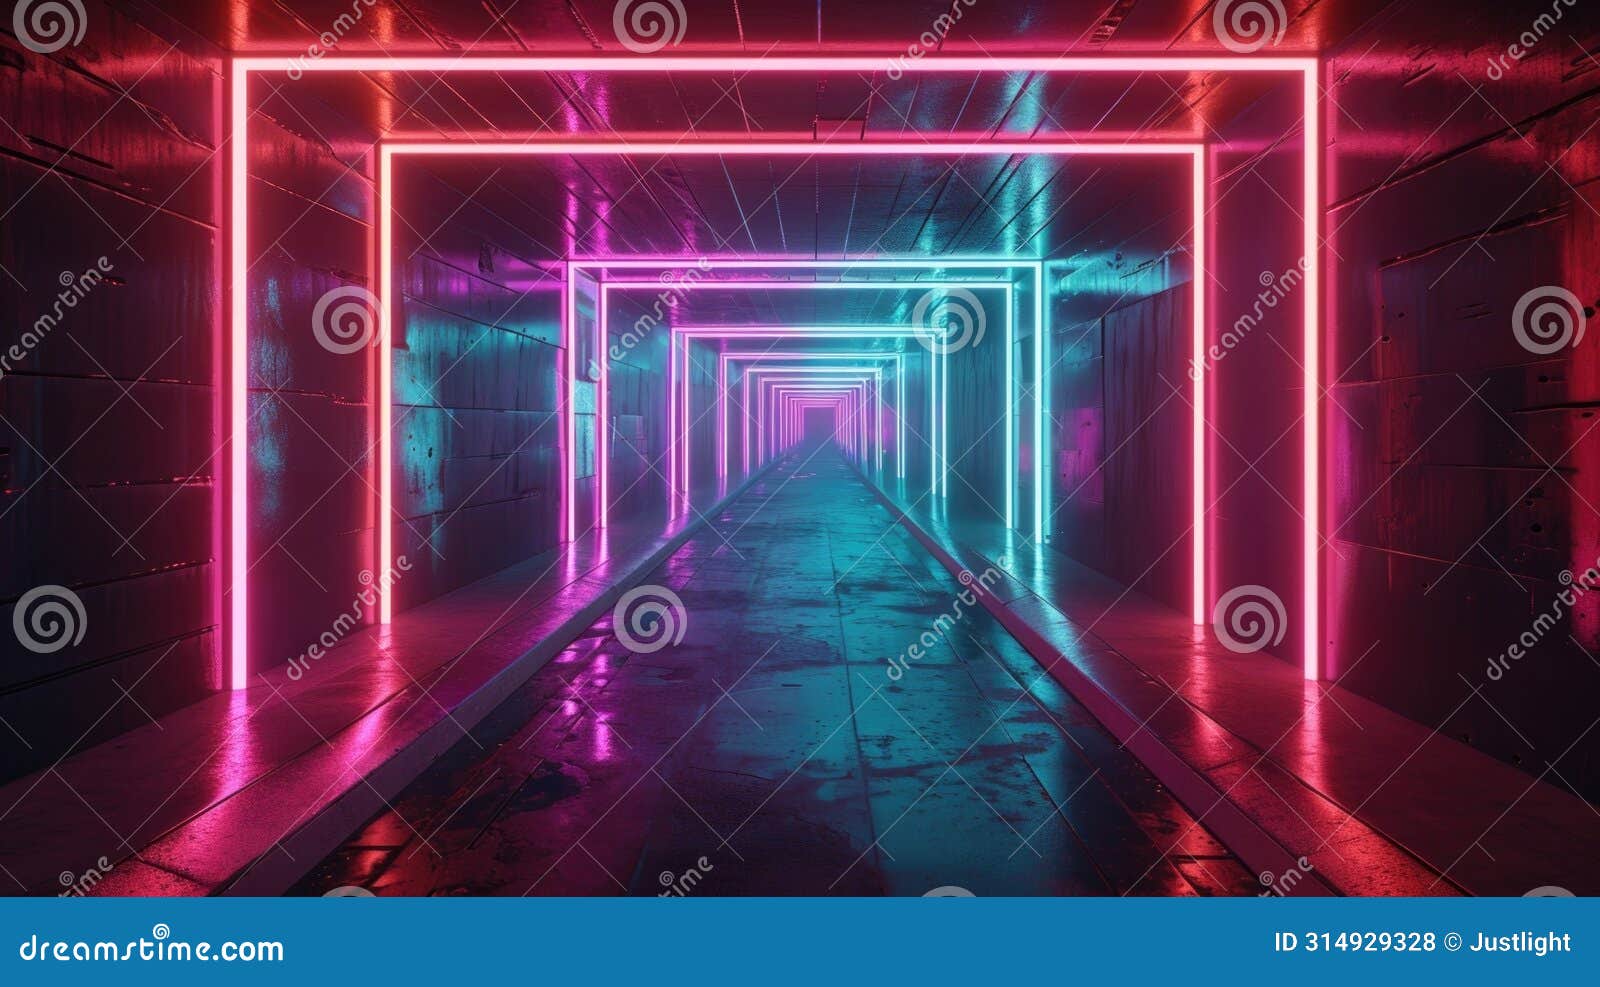 as you emerge from the neon tunnel you cant help but feel a sense of exhilaration and wonder from the journey